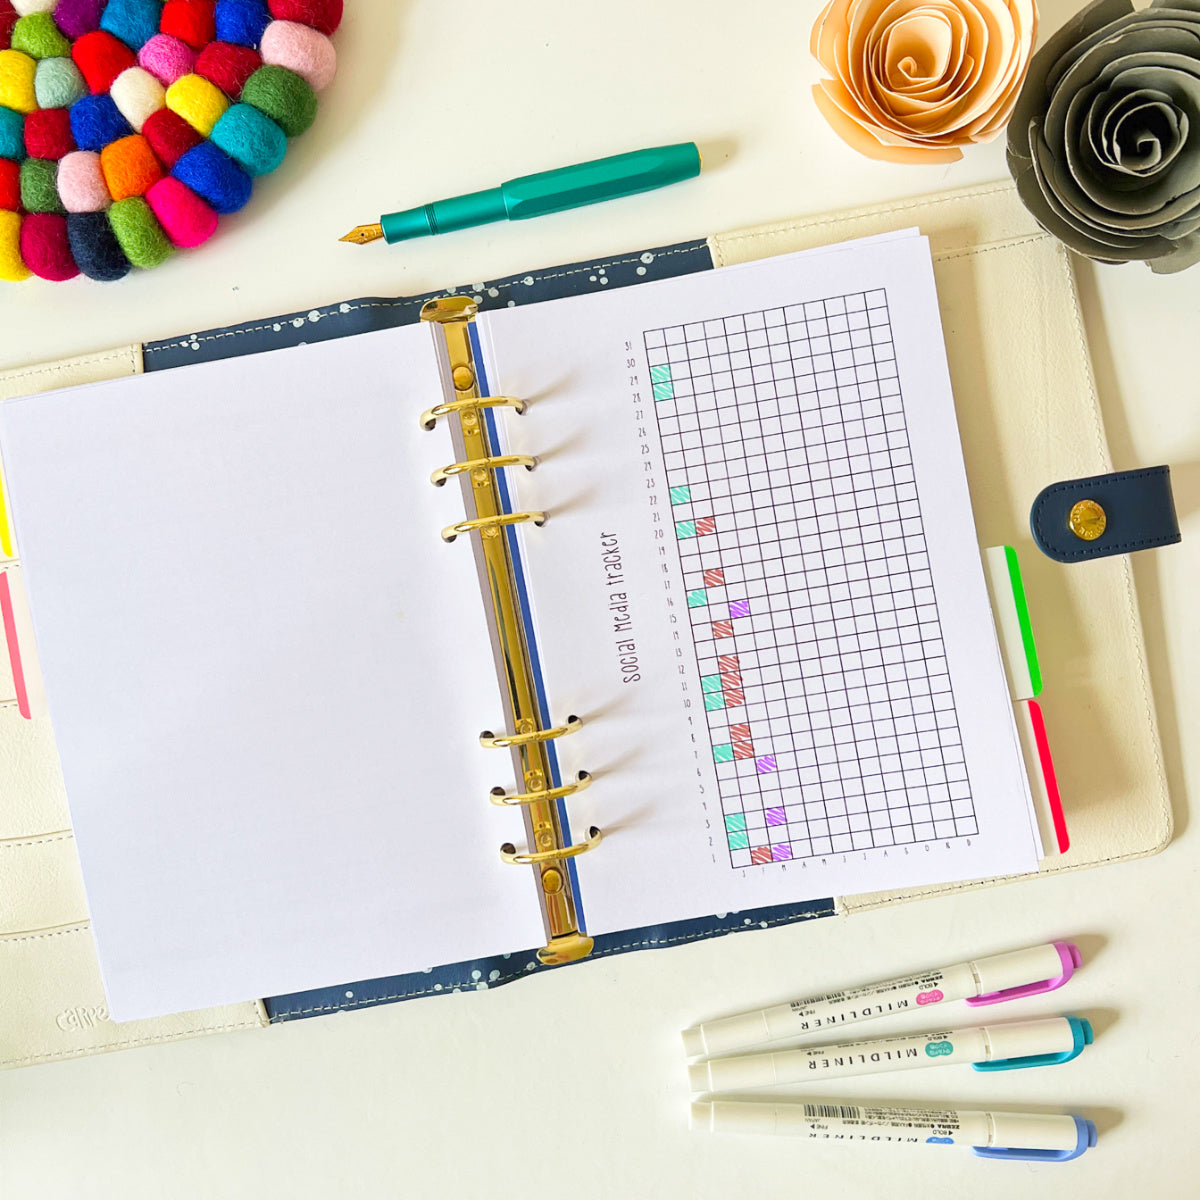 An open binder with graph paper inside displays a multicolored chart labeled "HAPPY NEW YEAR 2023." Surrounding the binder on a white surface are essentials for your Yearly Tracker Planner Page: a pen, markers, a decorative spiral paper flower, a colorful pom-pom coaster, and a closed cream-colored notebook.